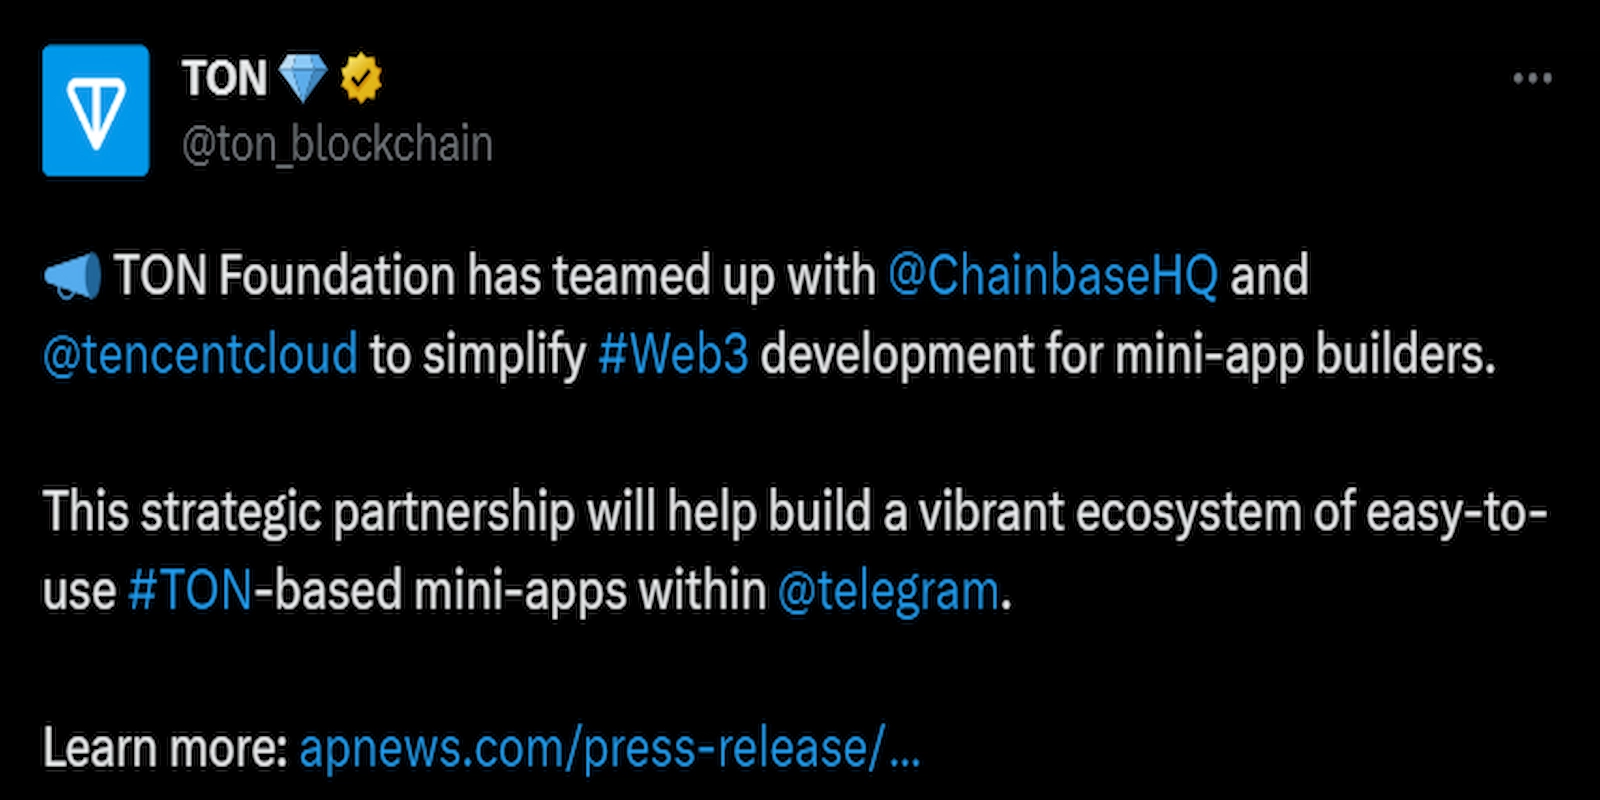 Toncoin has formed partnerships to expand its ecosystem